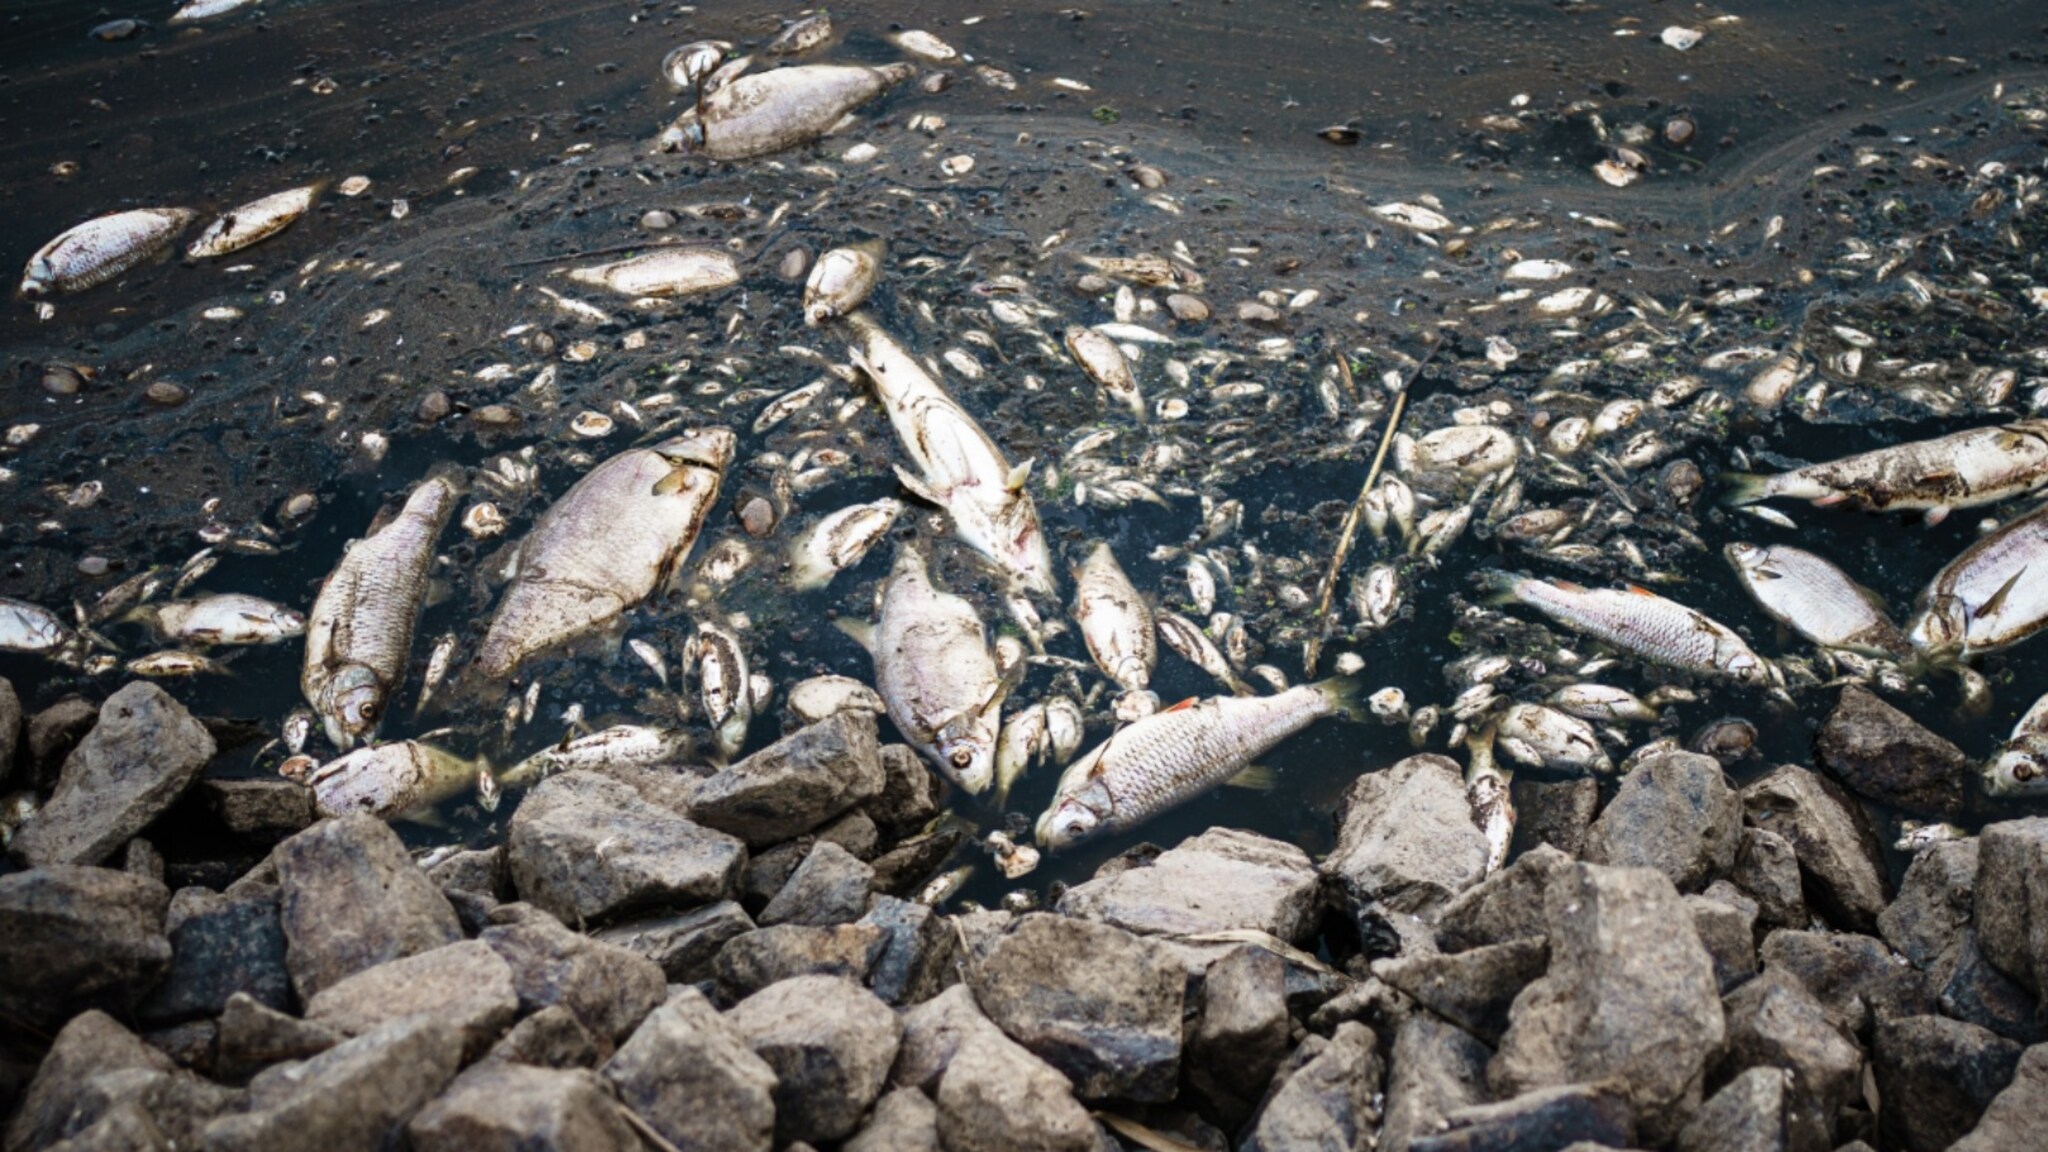 Mystery solved: Thousands of fish in Poland may have died from mercury